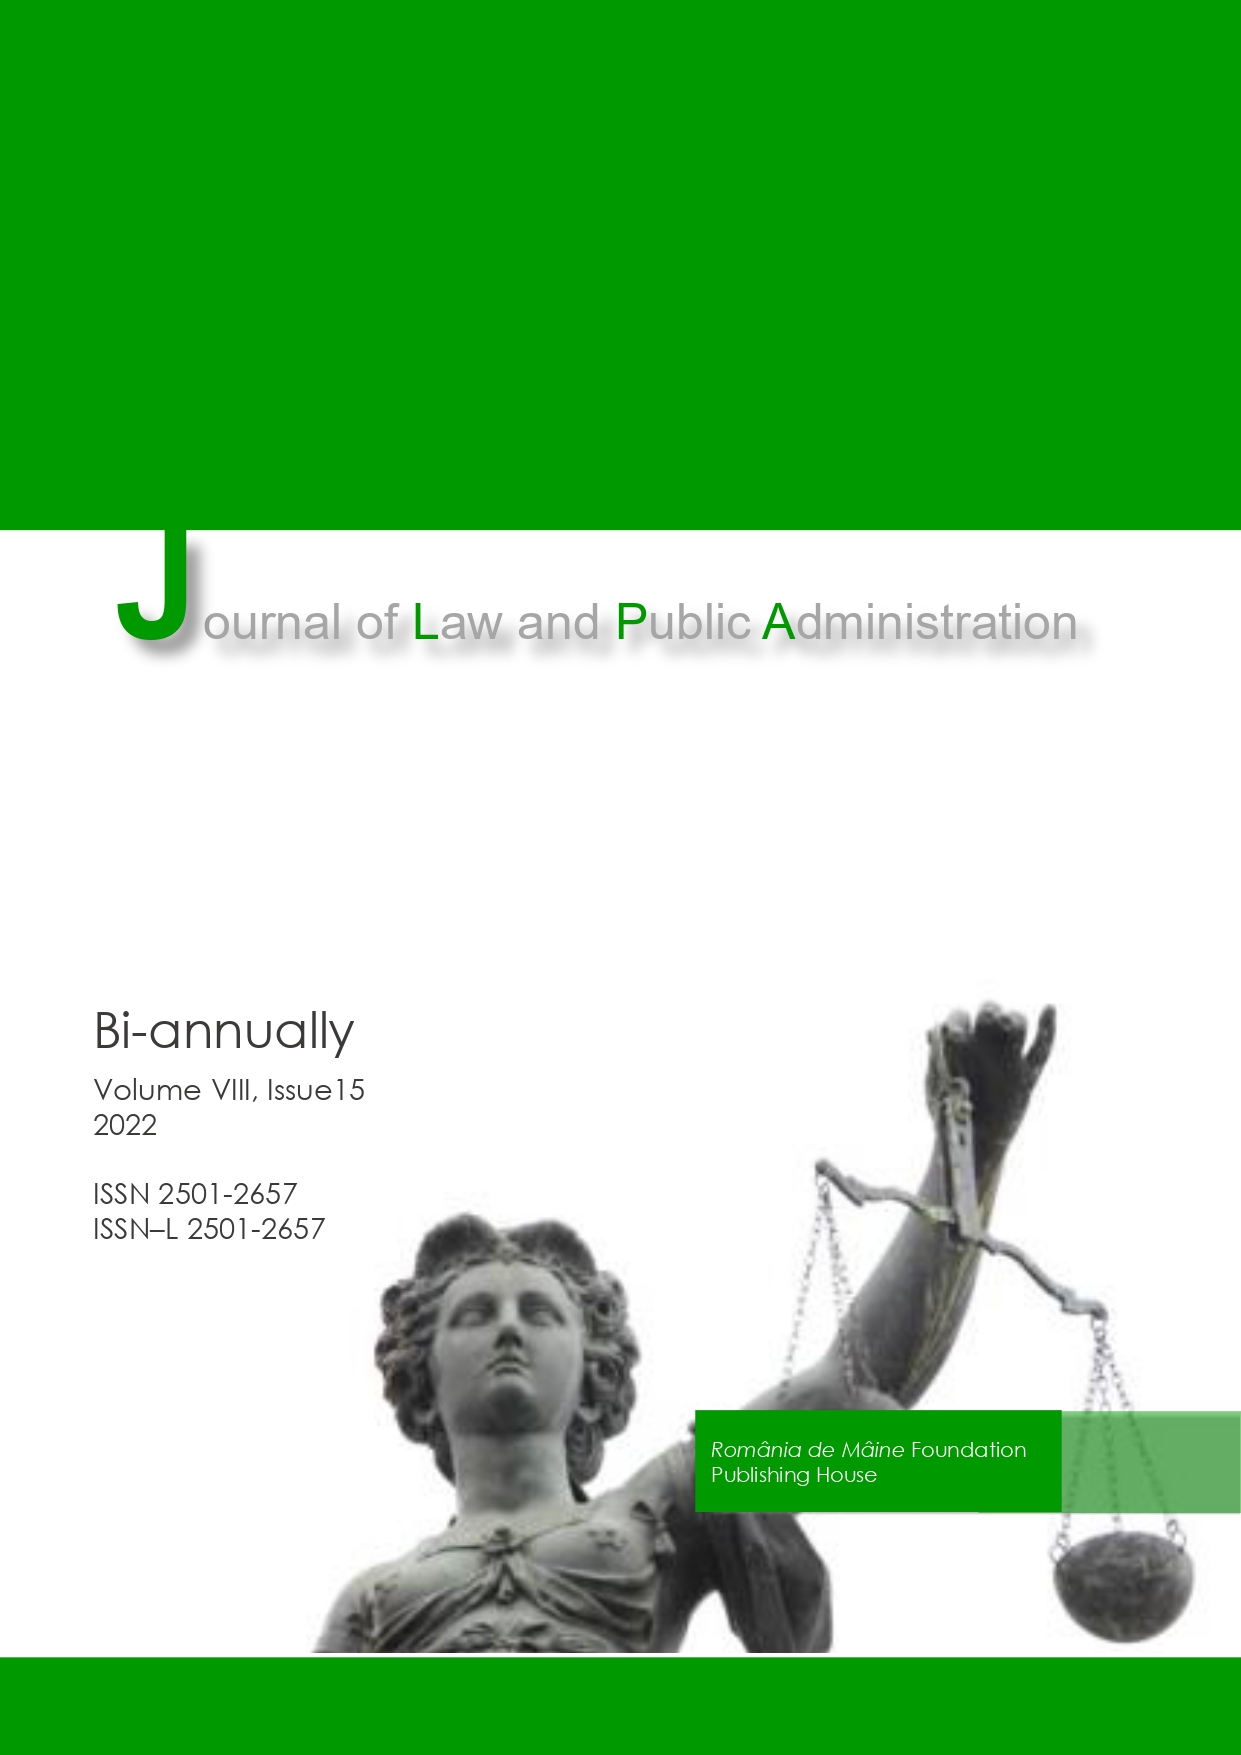 Protocol no.16 to the European Convention on Human Rights and Its Implementation through the Law no. 173/2022 Cover Image